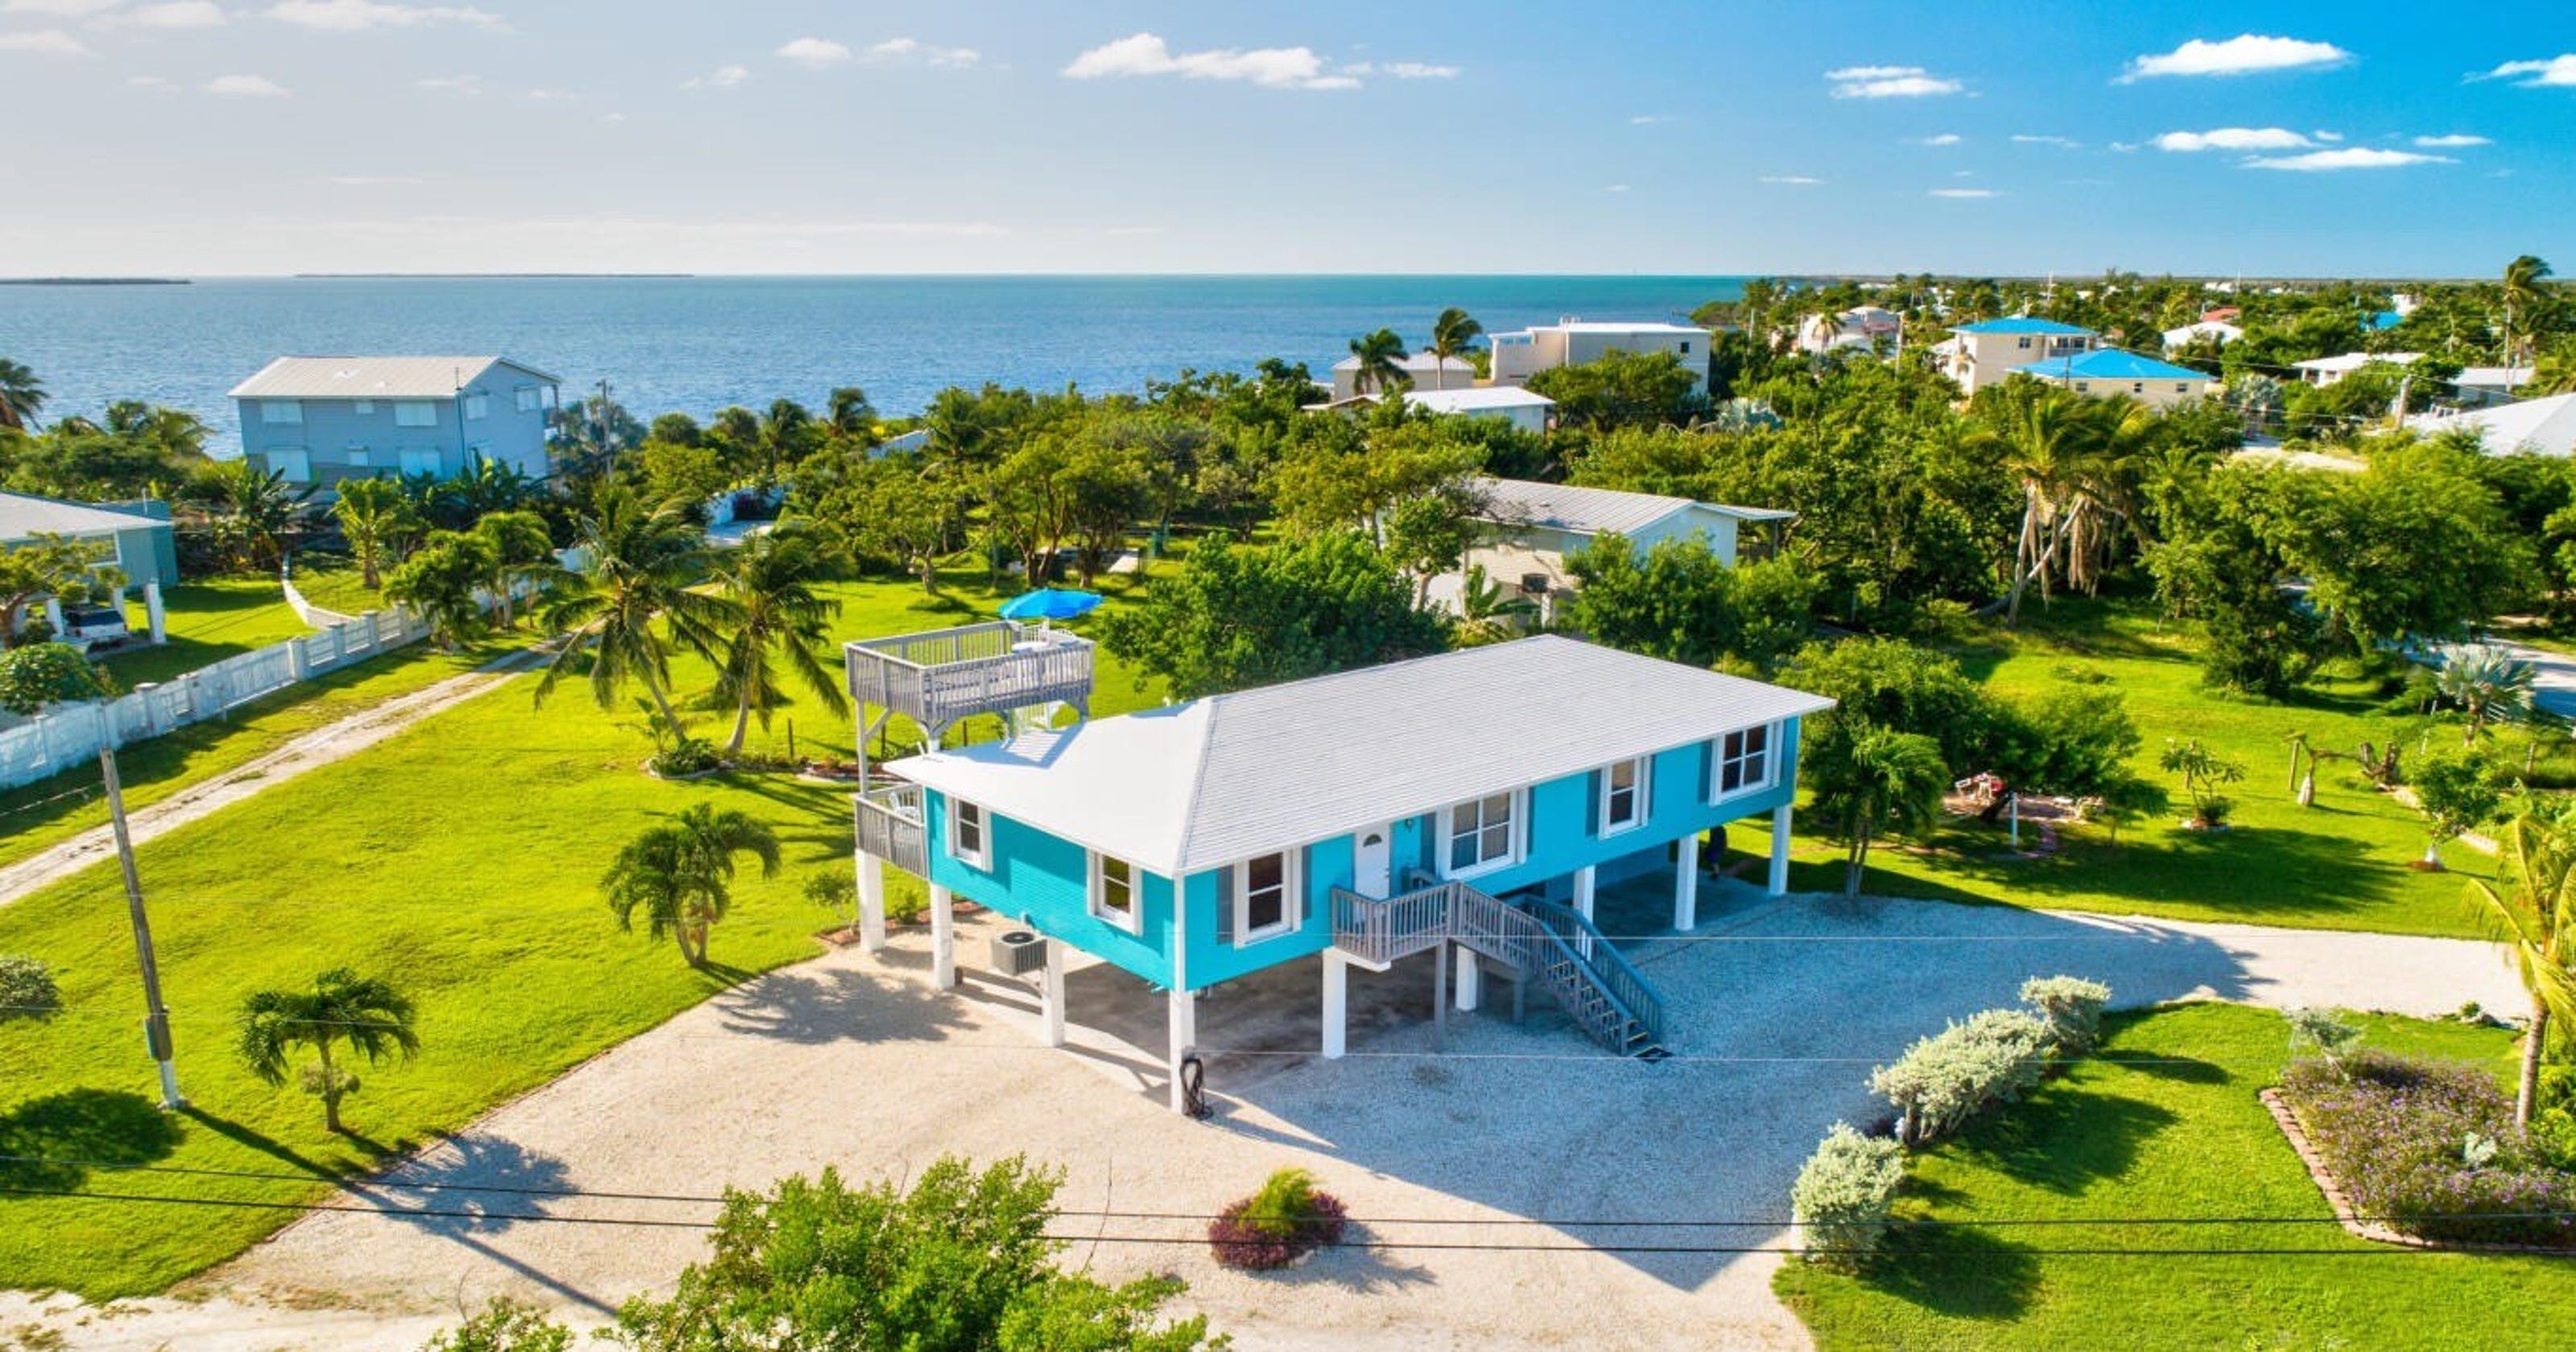 Dream vacation homes for sale in the Florida Keys